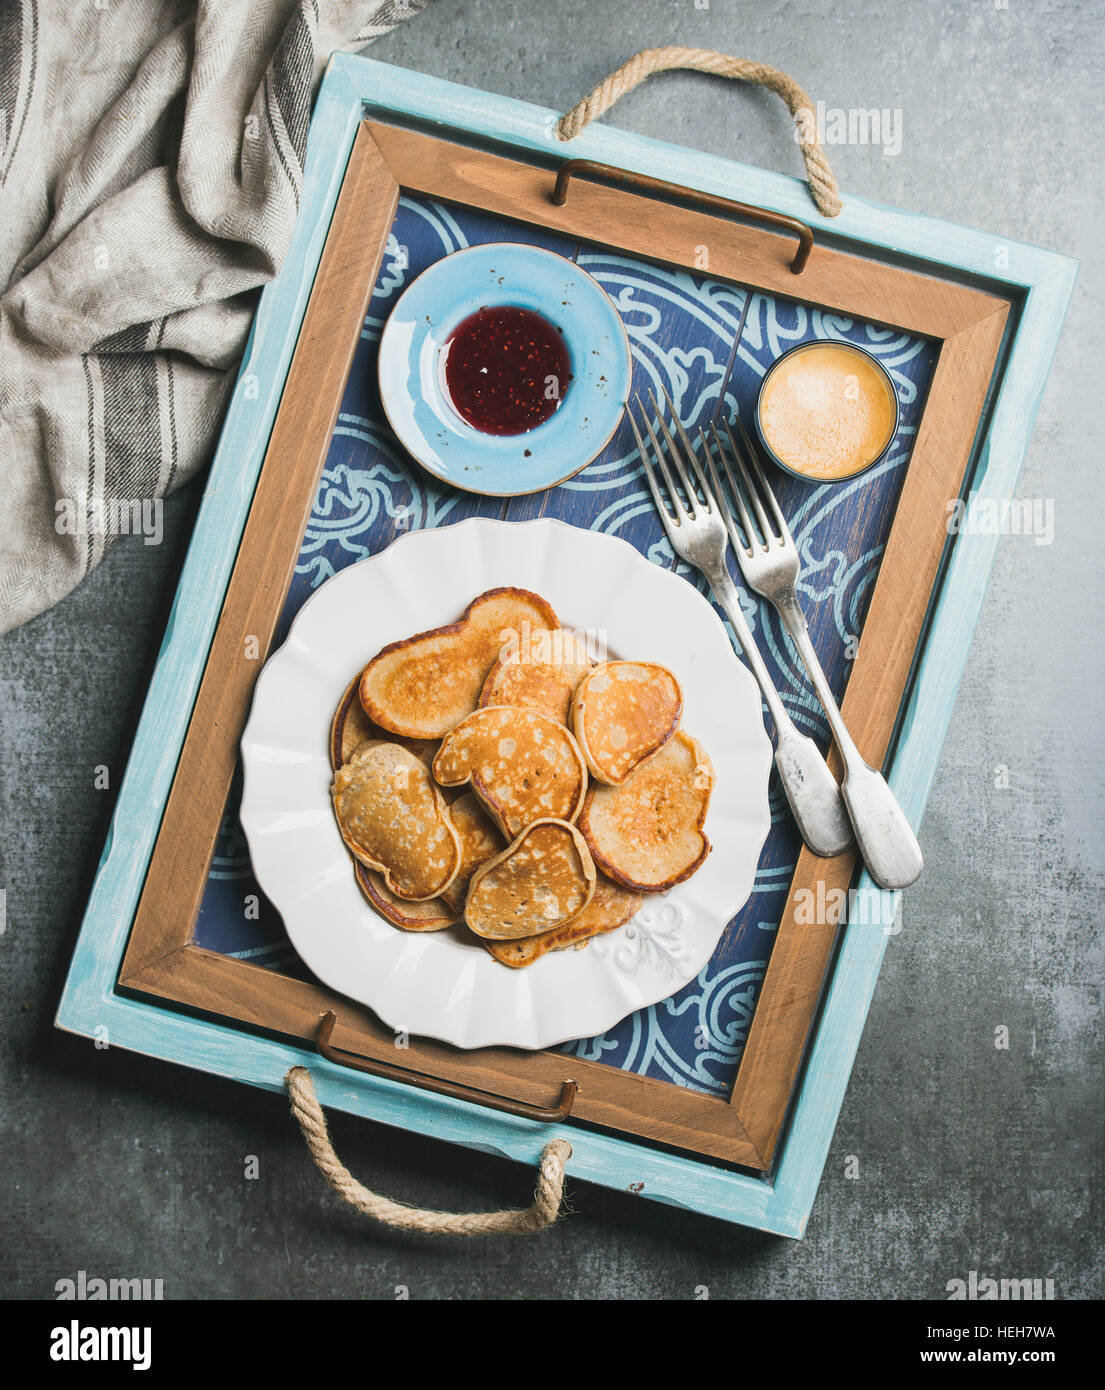 Breakfast tray with whole grain pancakes, raspberry jam and coffee espresso. Top view, shabby dark blue background Stock Photo